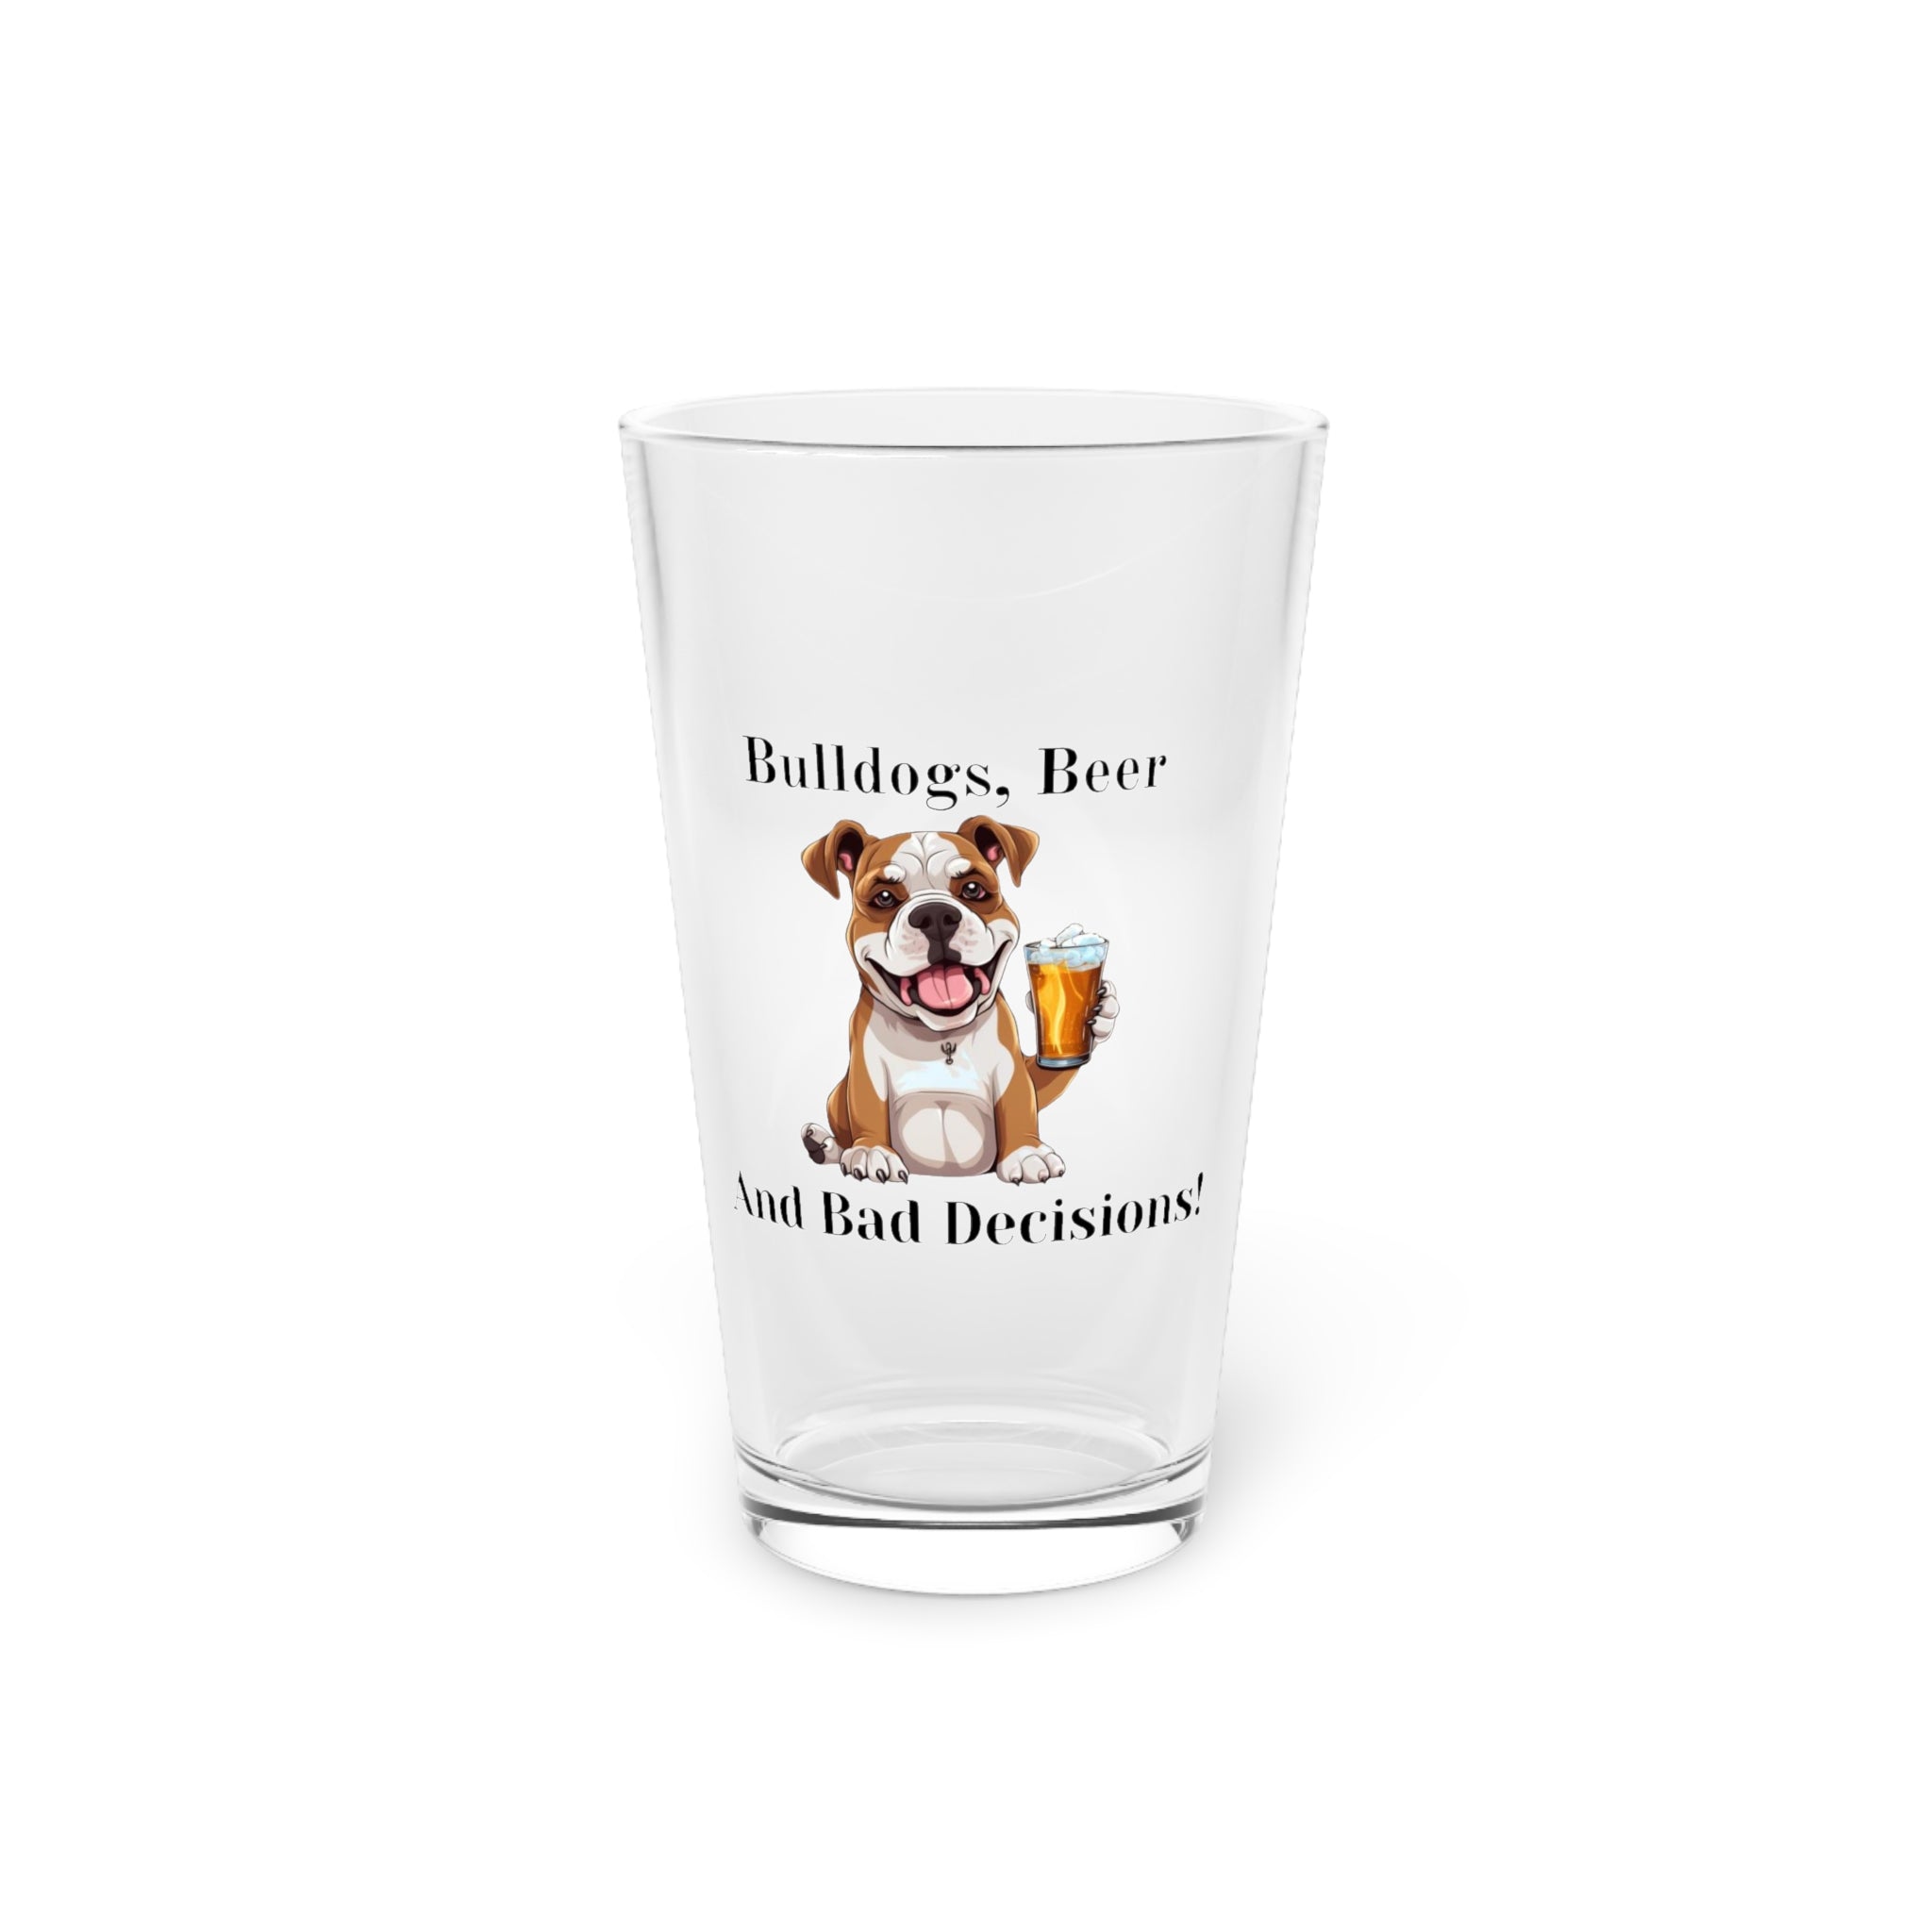 Bulldogs, Beer, and Bad Decisions!" - The Ultimate Pint Glass by Tipsy Bully (American/white)